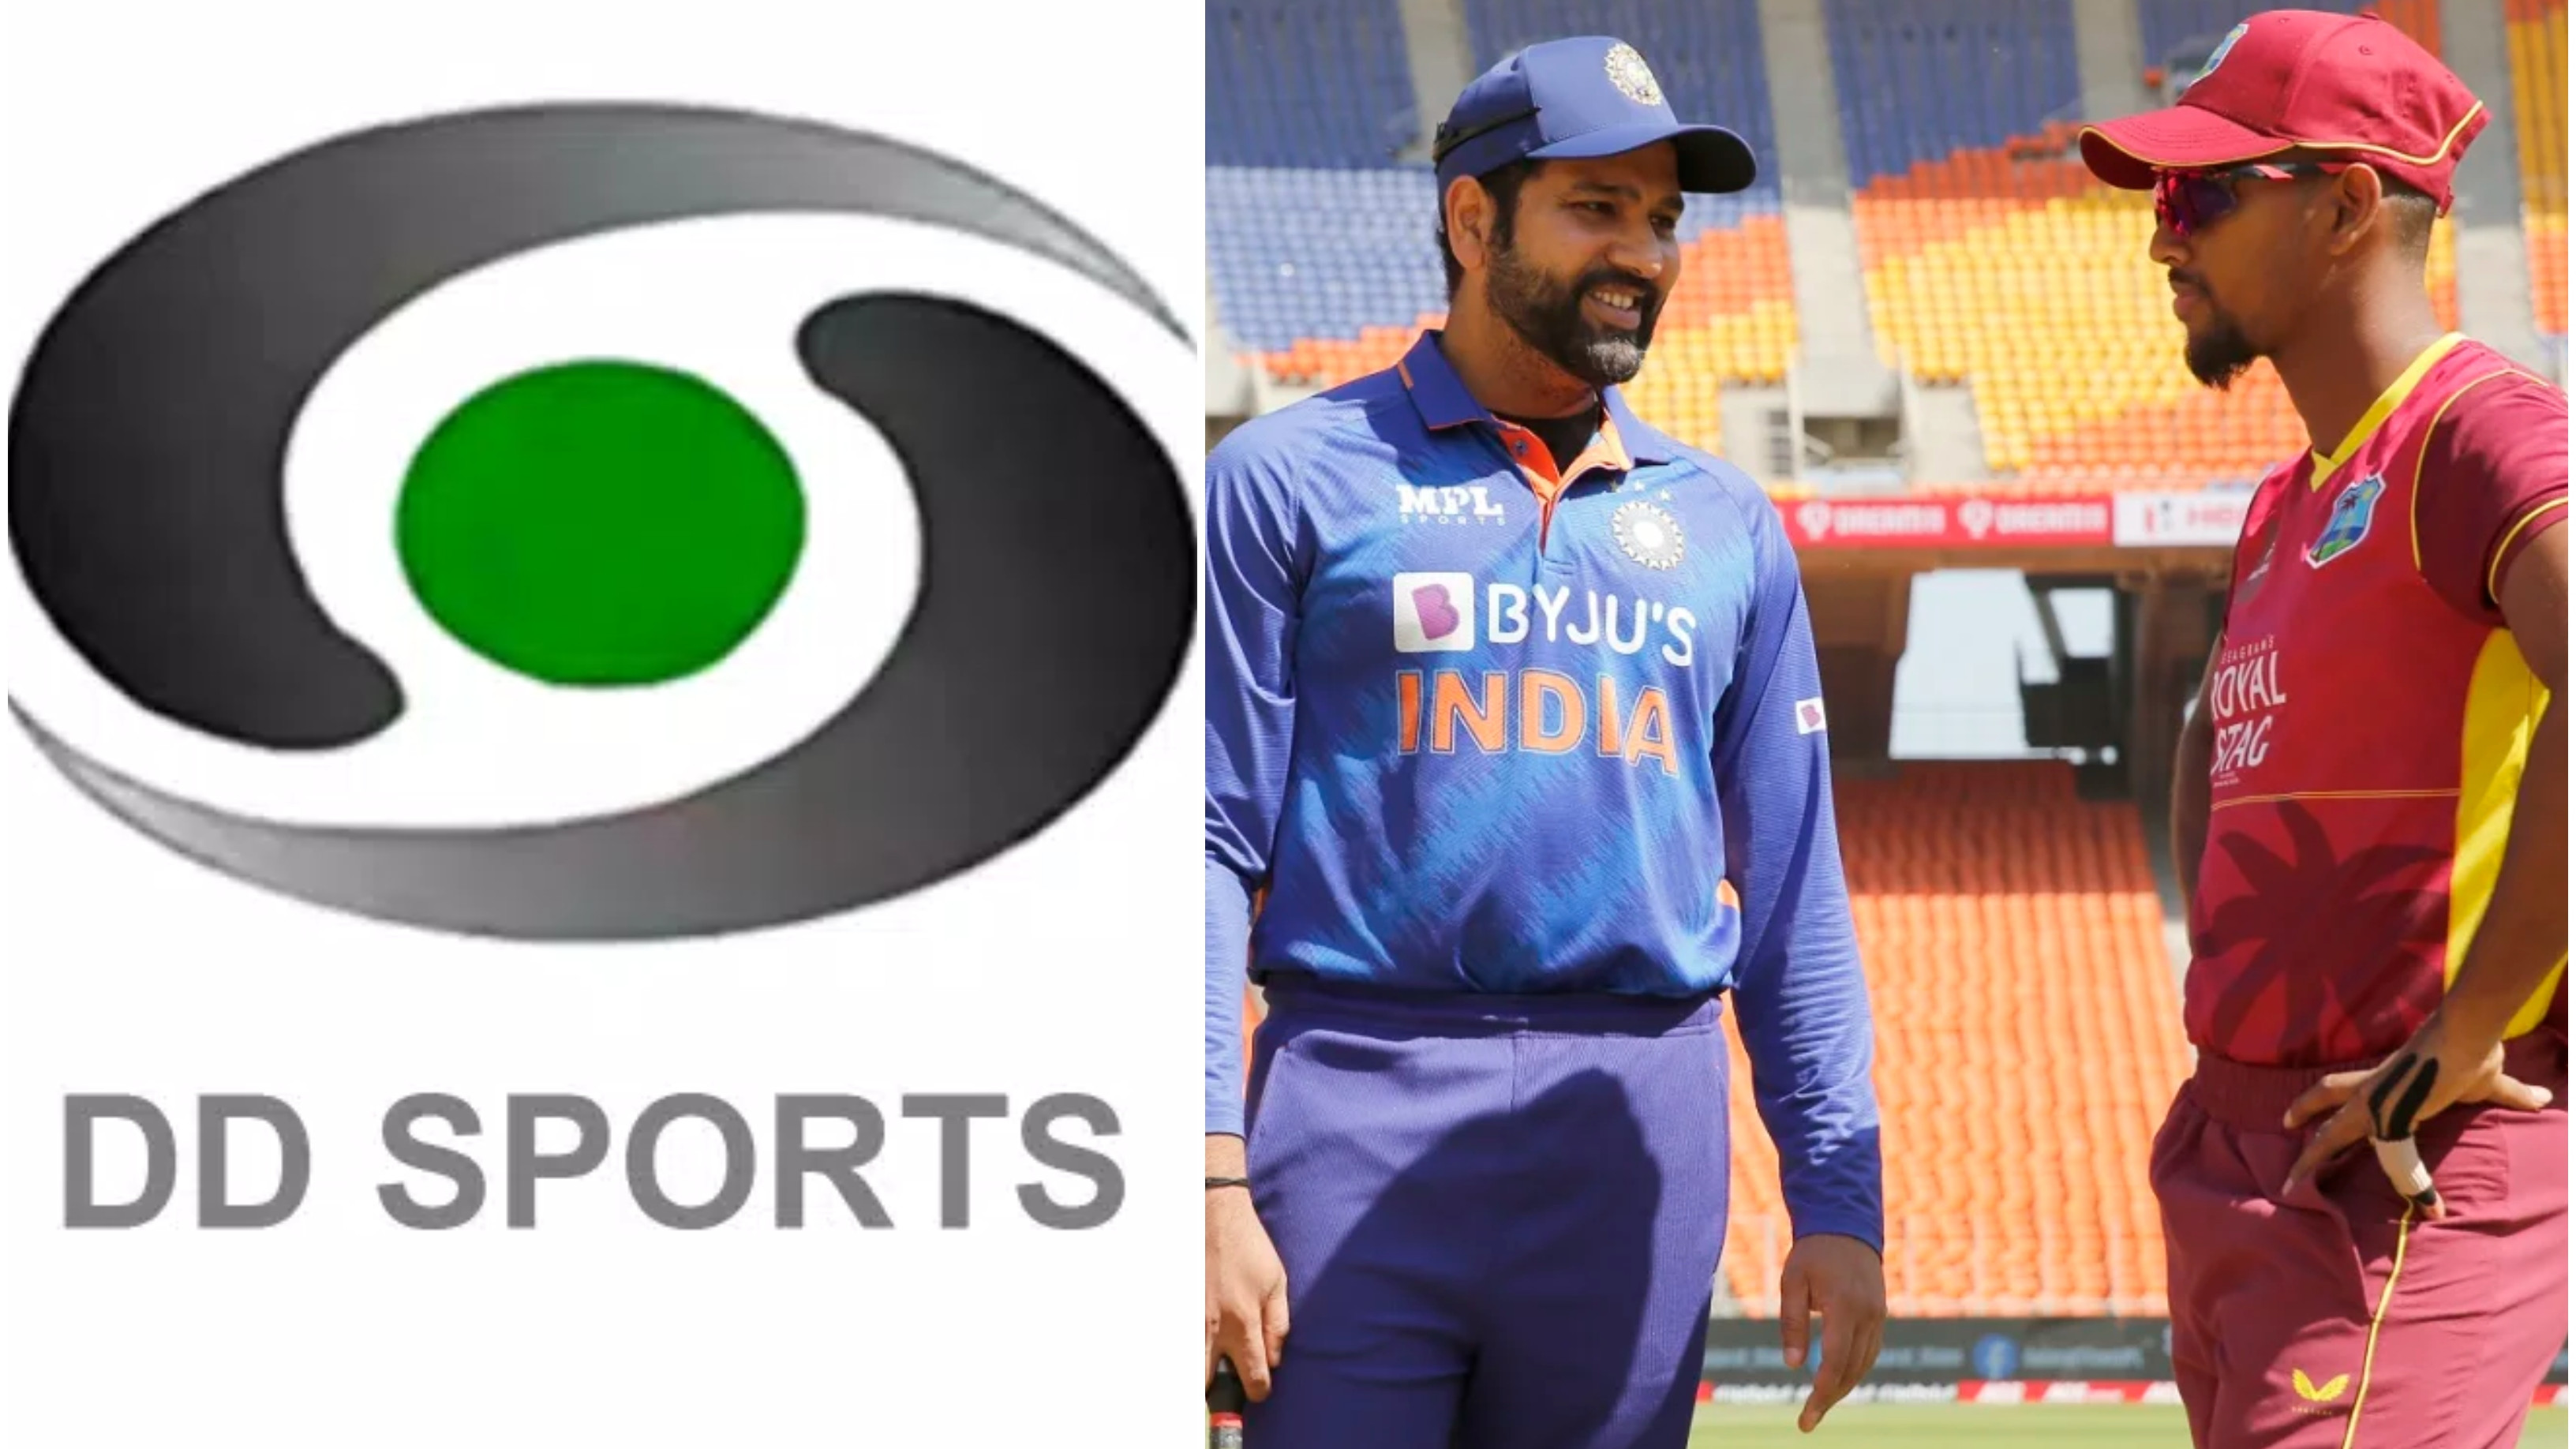 WI v IND 2022: DD Sports secures broadcasting rights of India's upcoming white-ball tour to West Indies